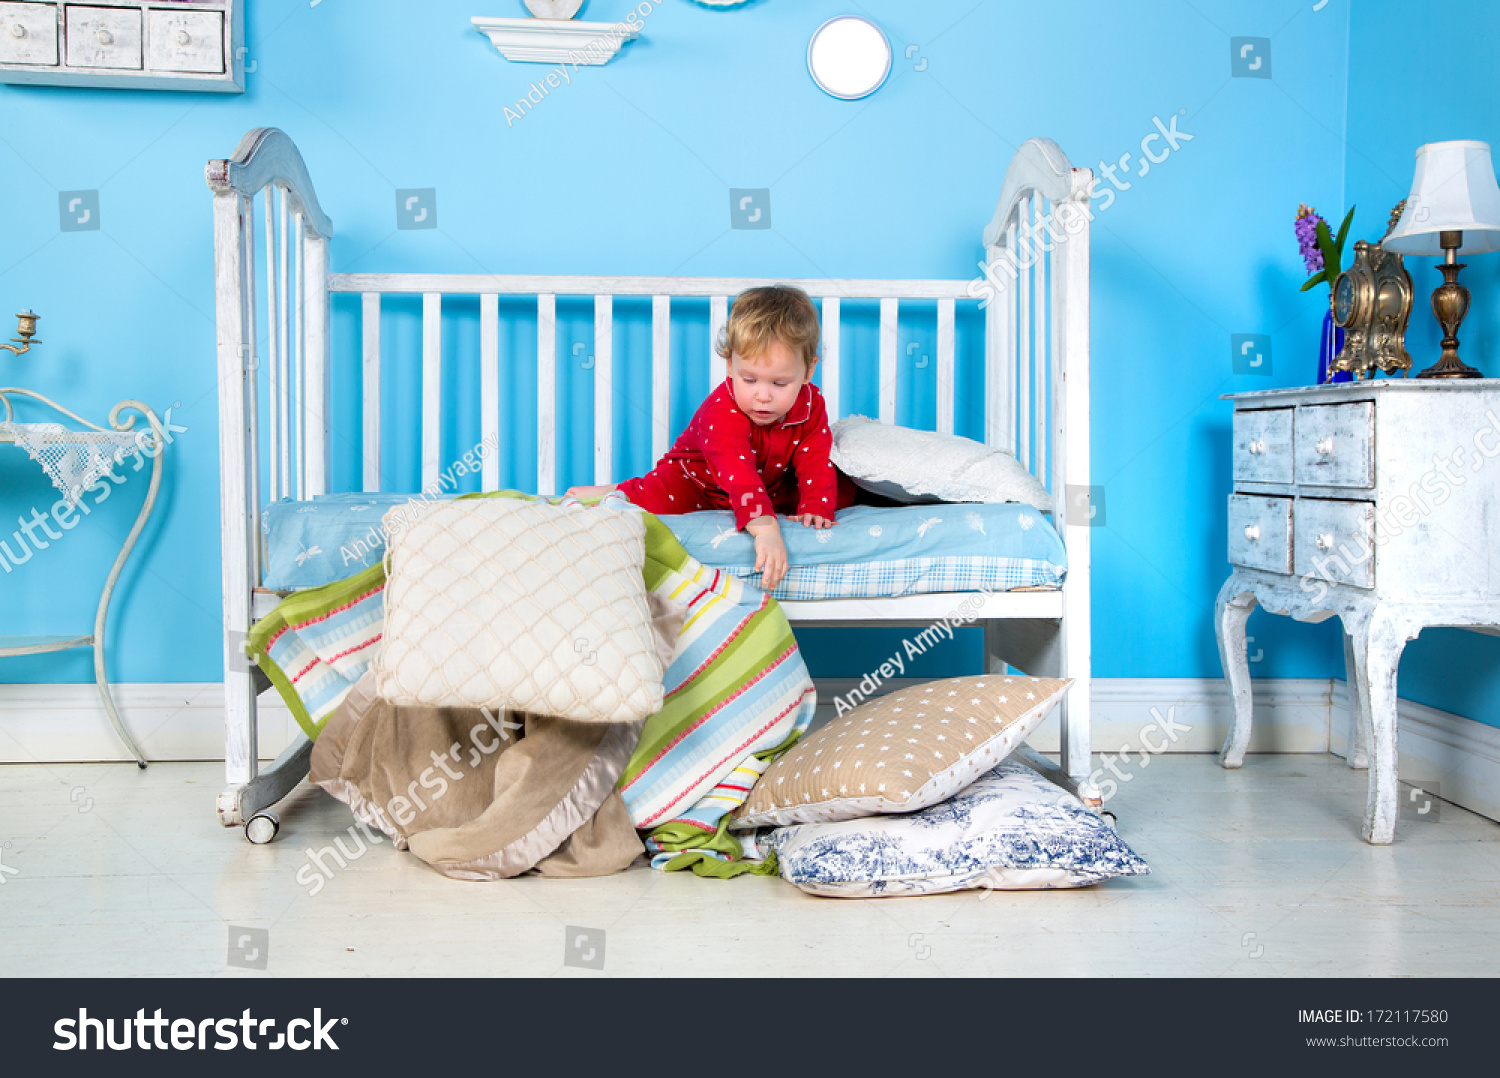 http://image.shutterstock.com/z/stock-photo-baby-playing-on-bed-172117580.jpg